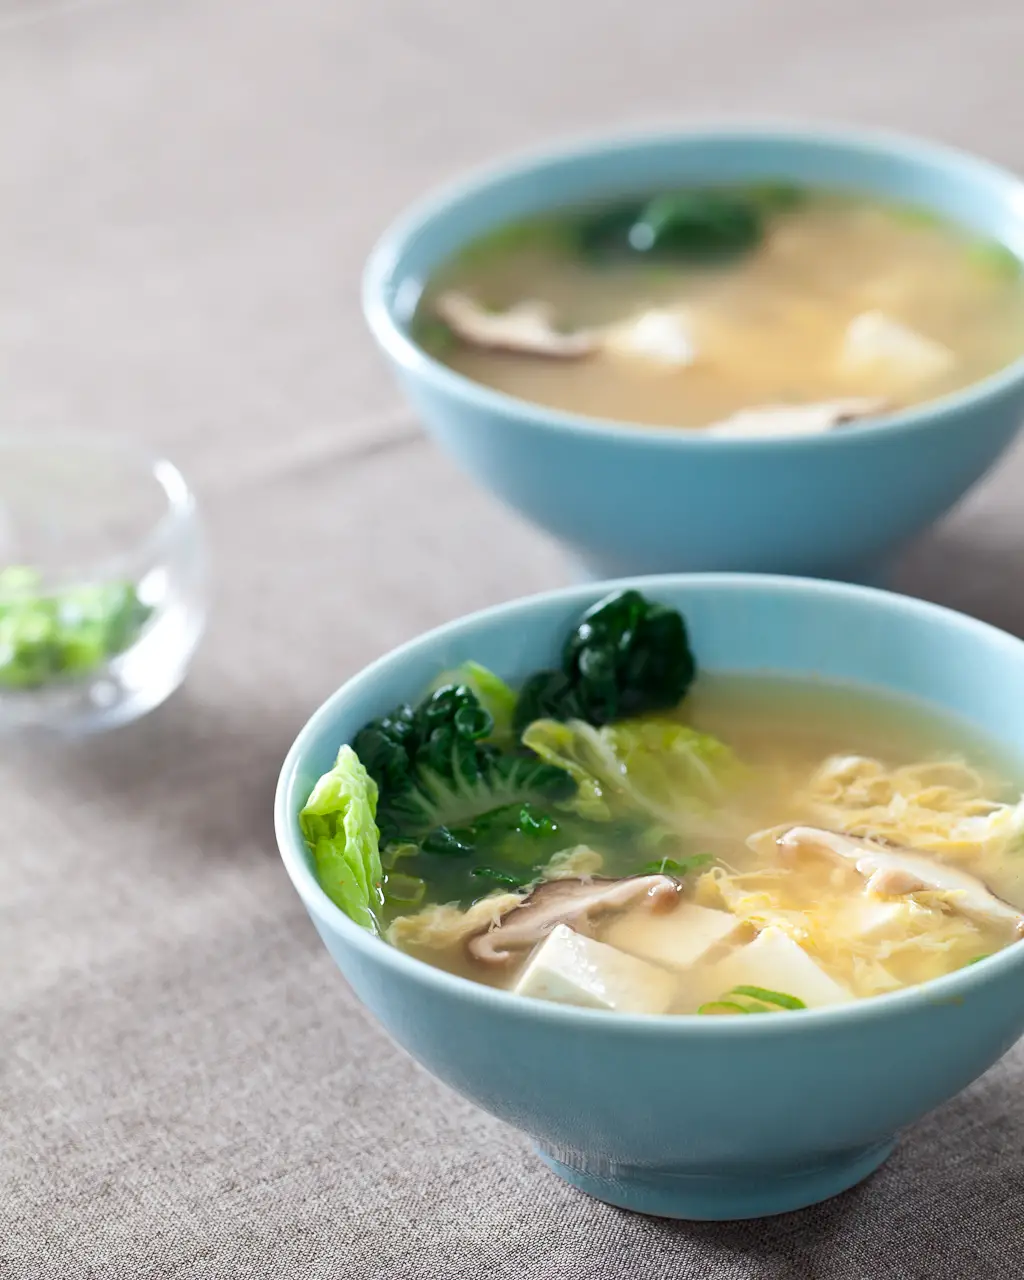 How To Make Miso Soup with Shiitake Mushrooms : Glorious Soup Recipes